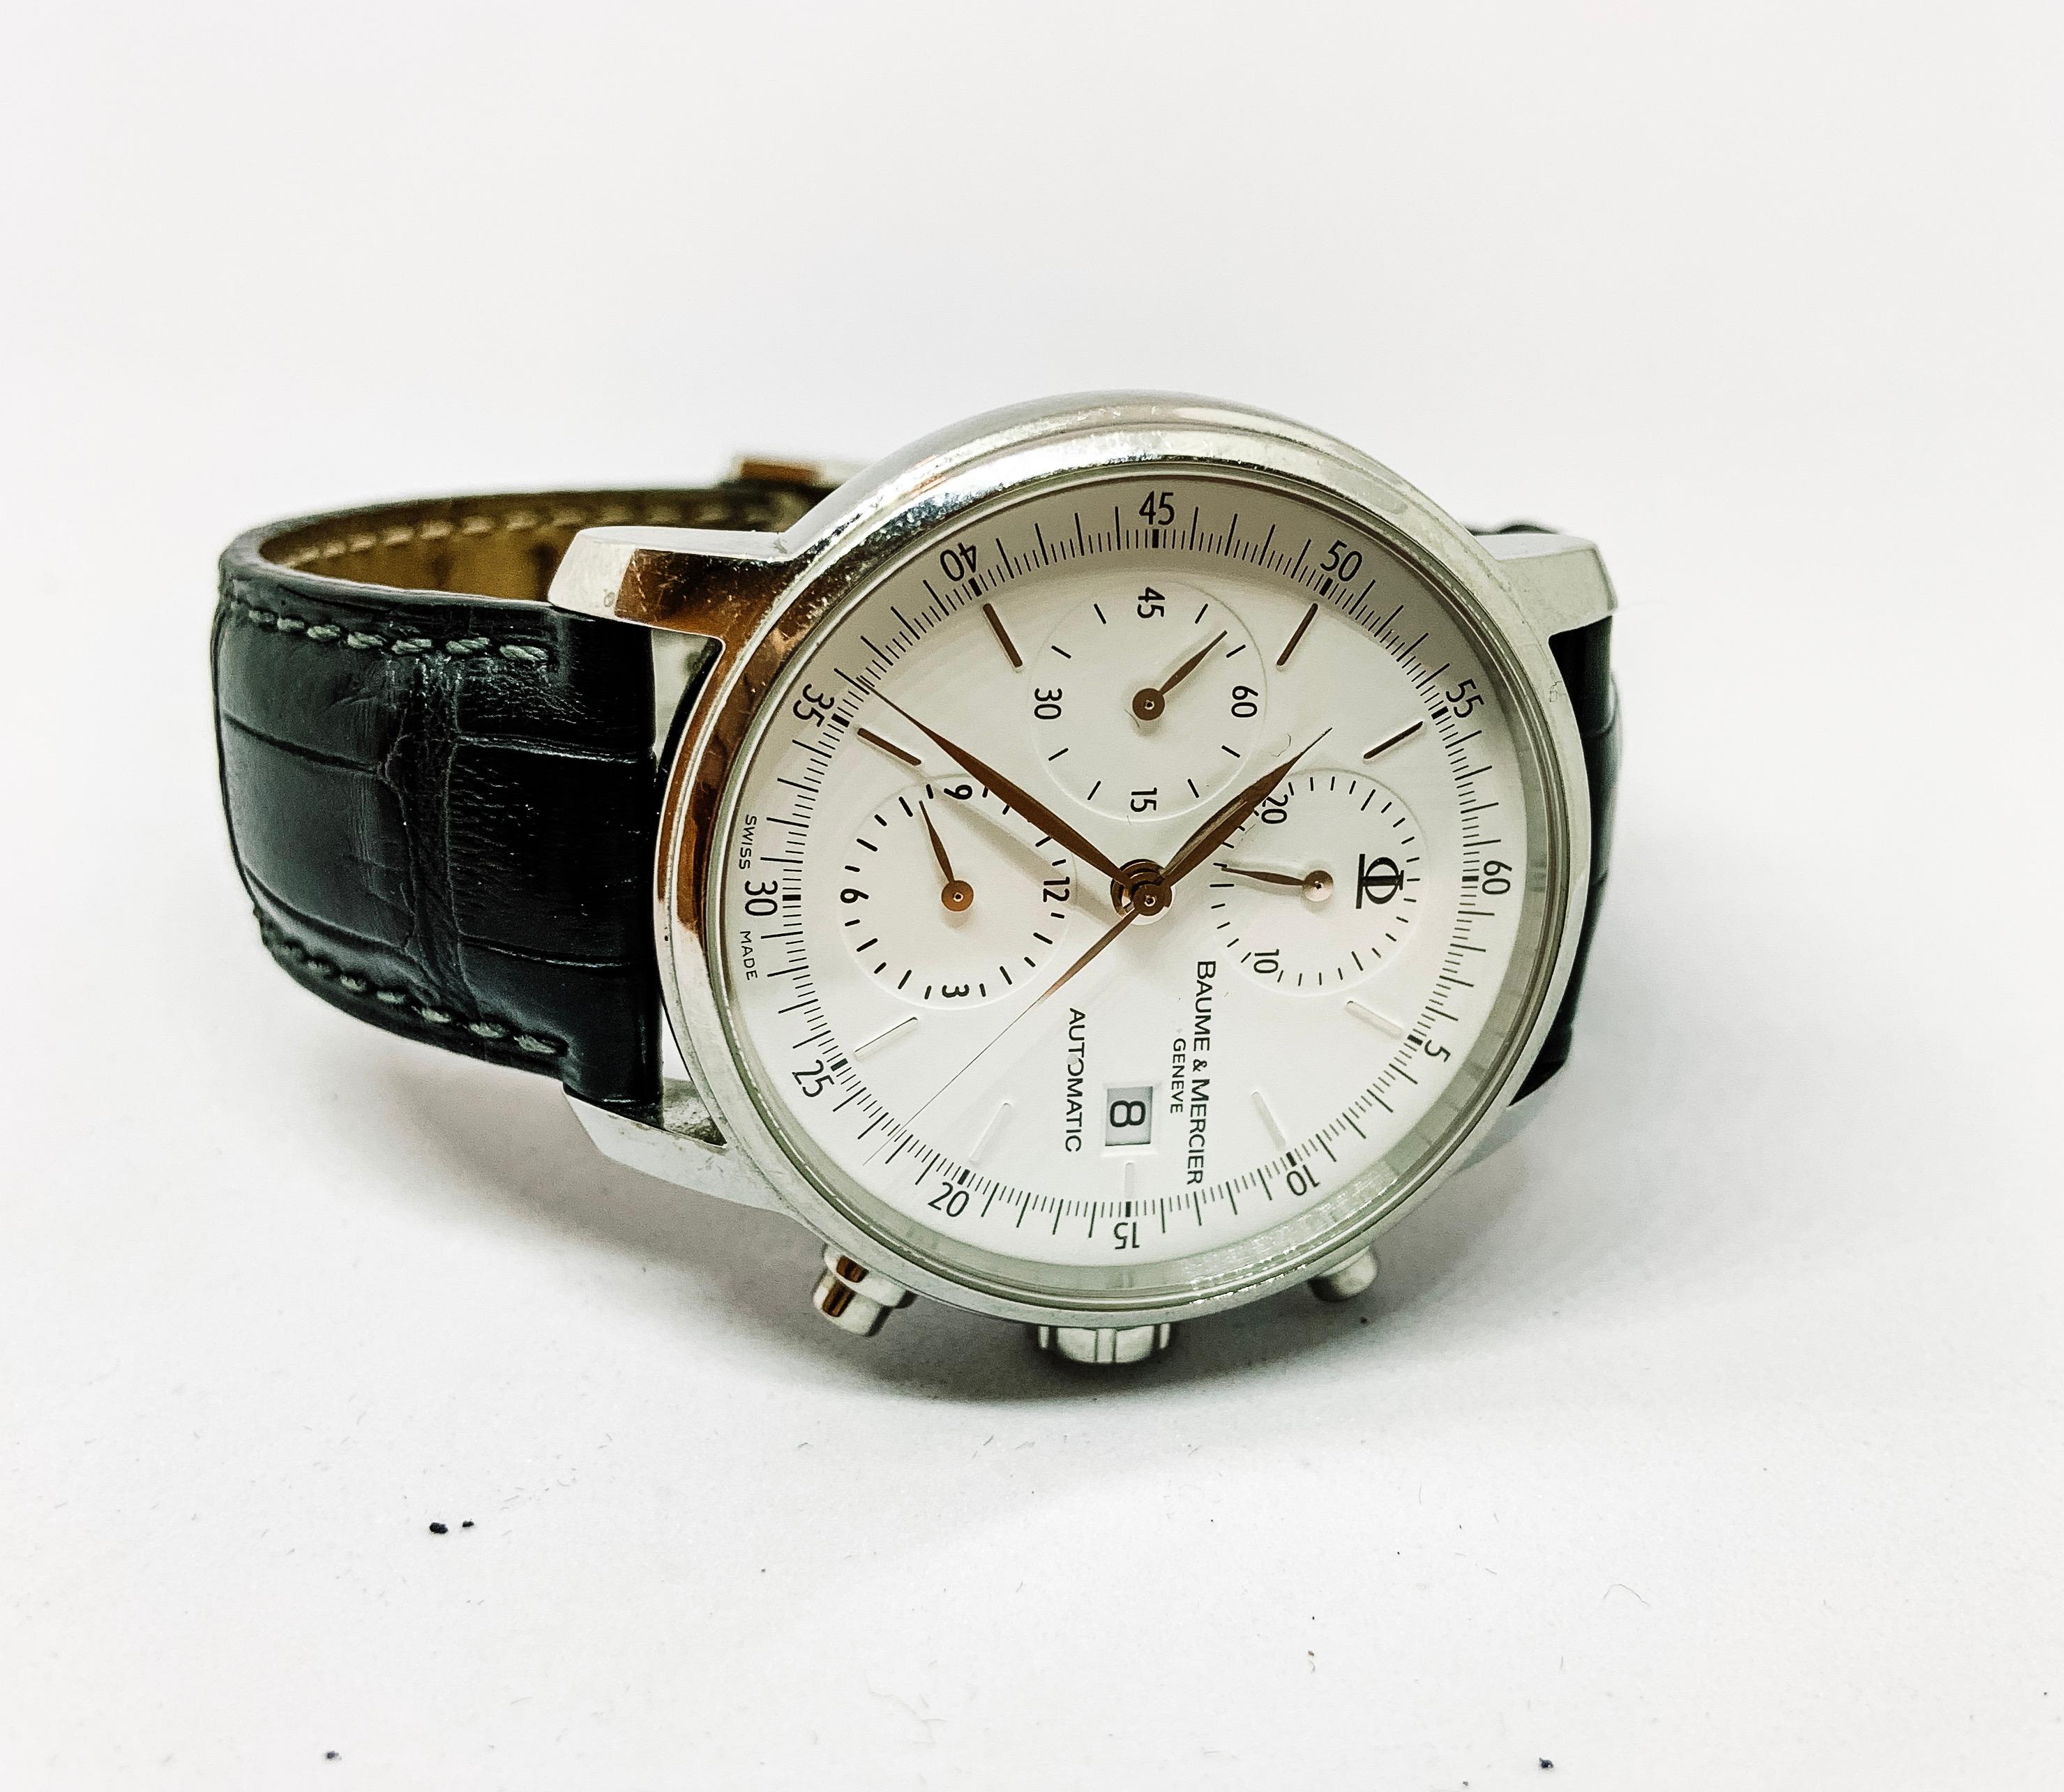 One Stainless Steel Automatic Watch Made In Geneva And Designed By Baume & Mercier Gentlemen's Wrist Watch with black crocodile leather band and an all white face with date window and chronograph on the face of the watch. 
Manual, Limited Warranty